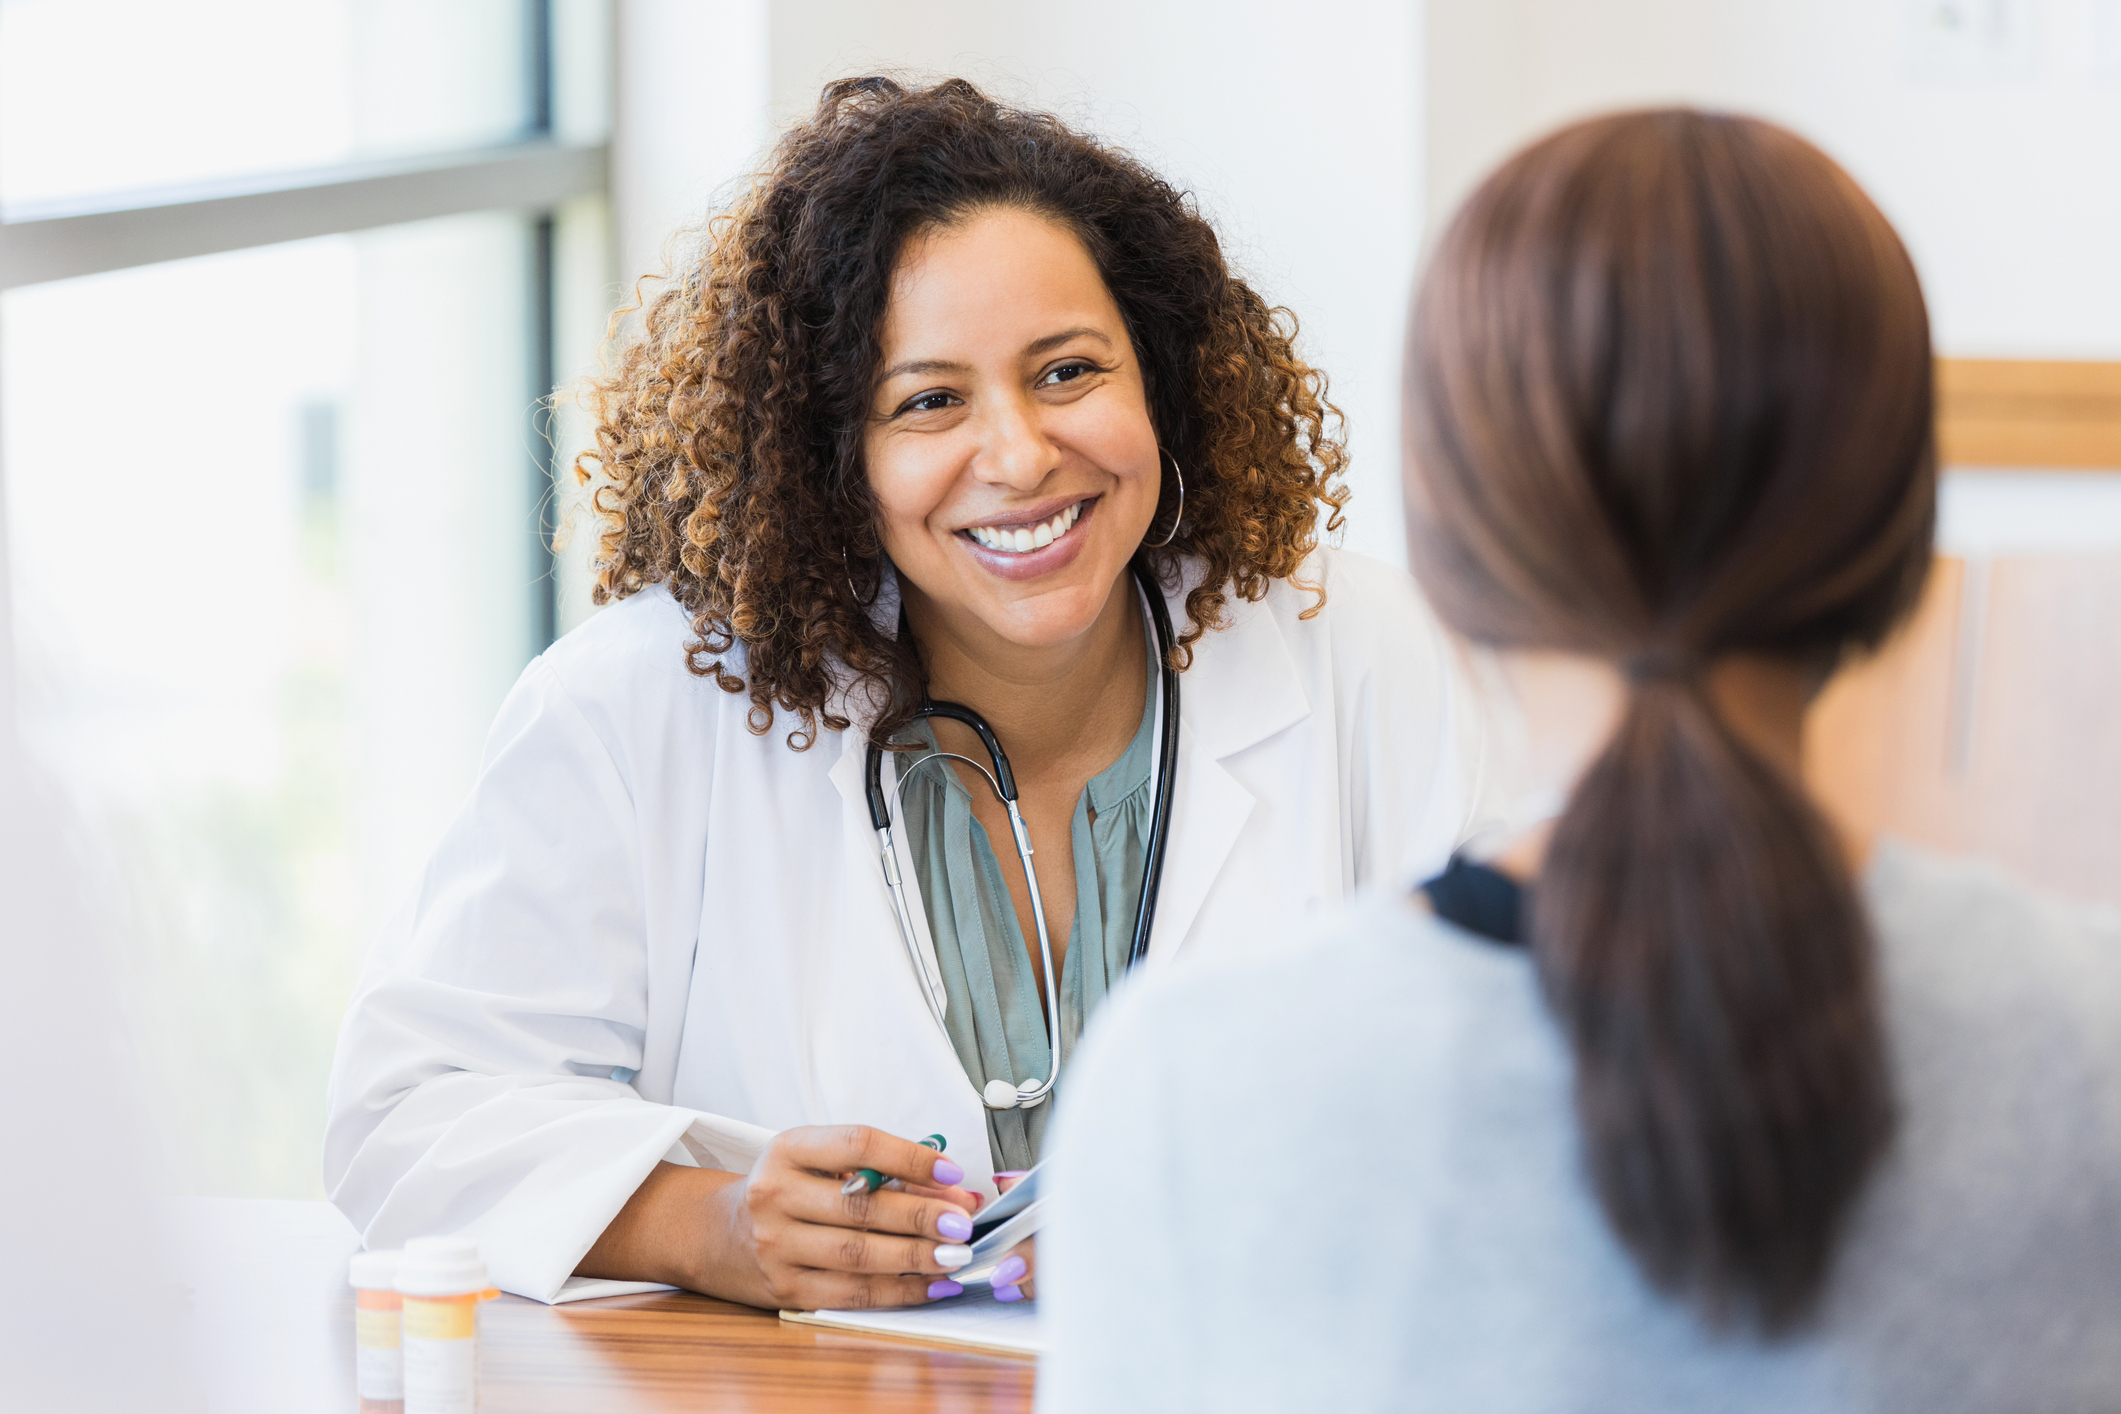 Female doctor smiling at patient